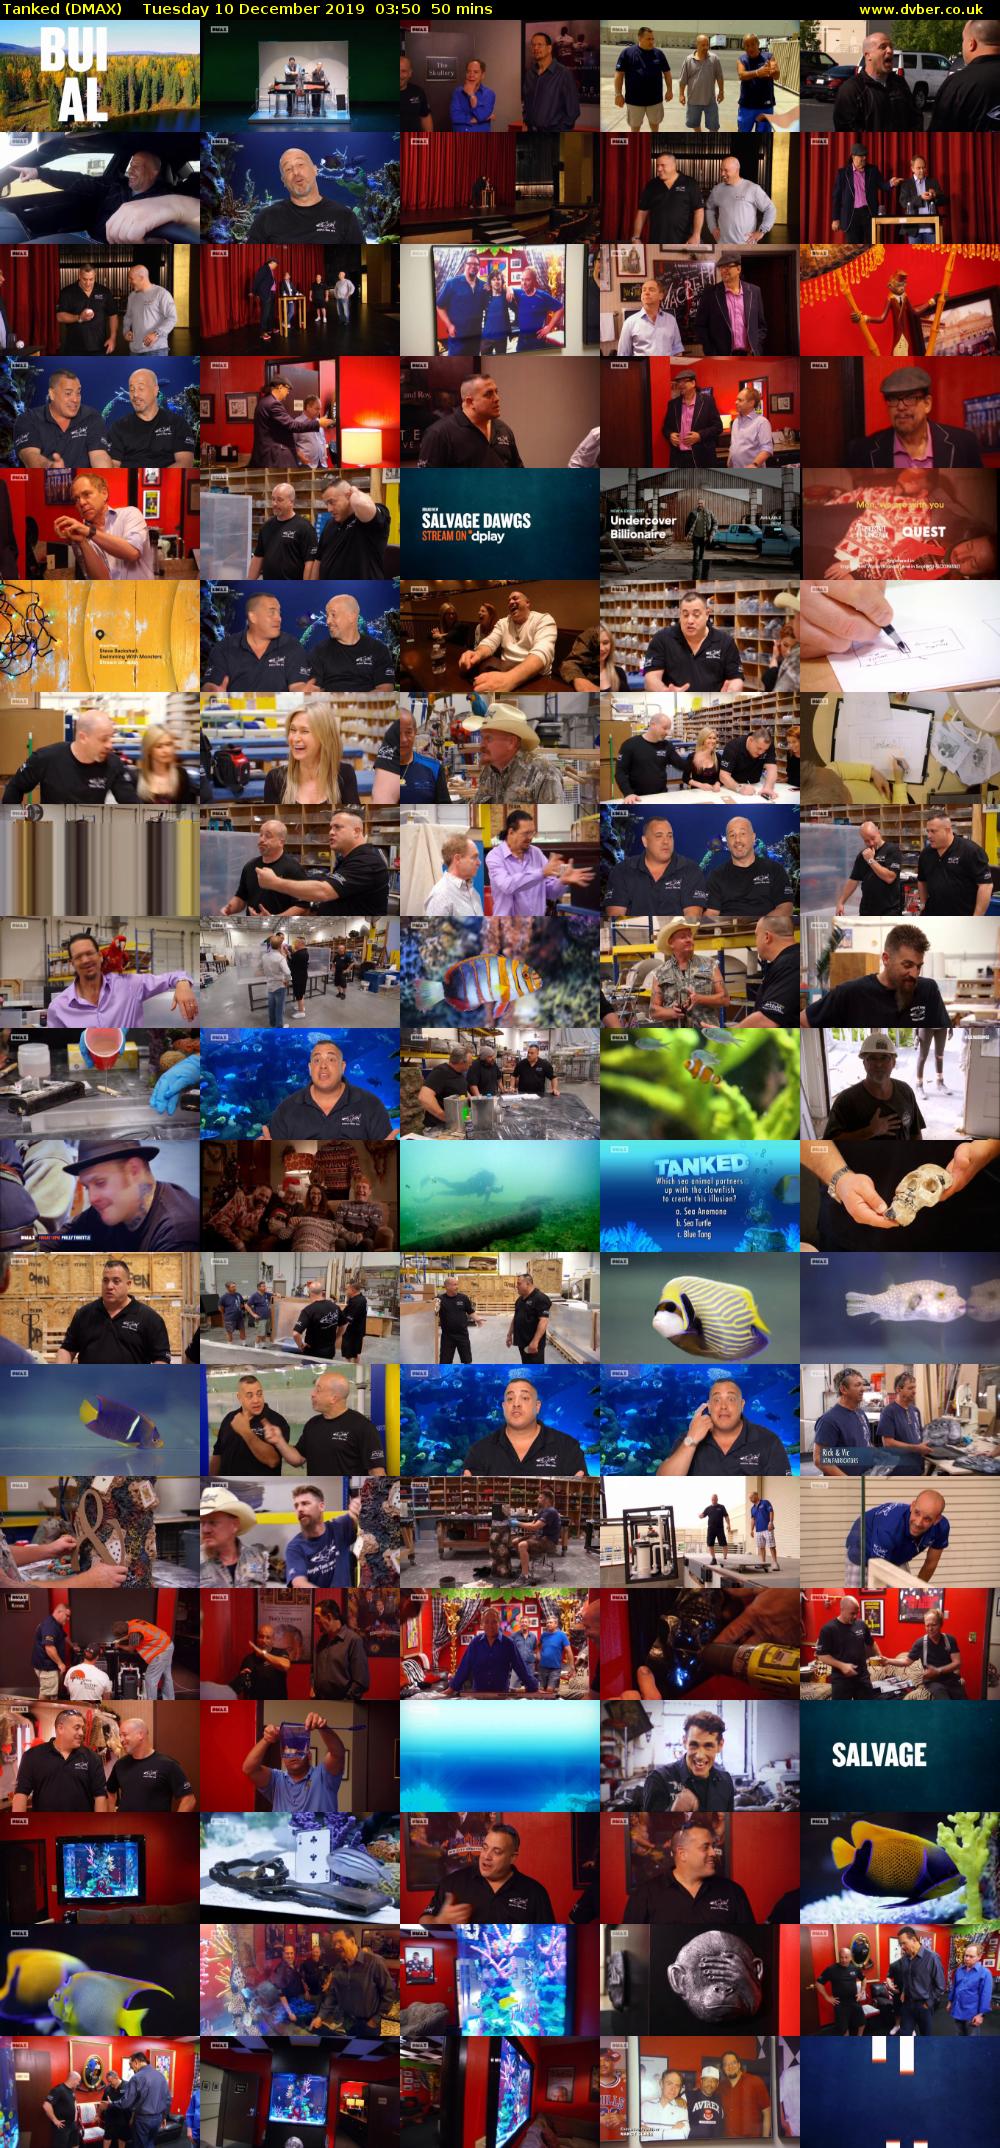 Tanked (DMAX) Tuesday 10 December 2019 03:50 - 04:40